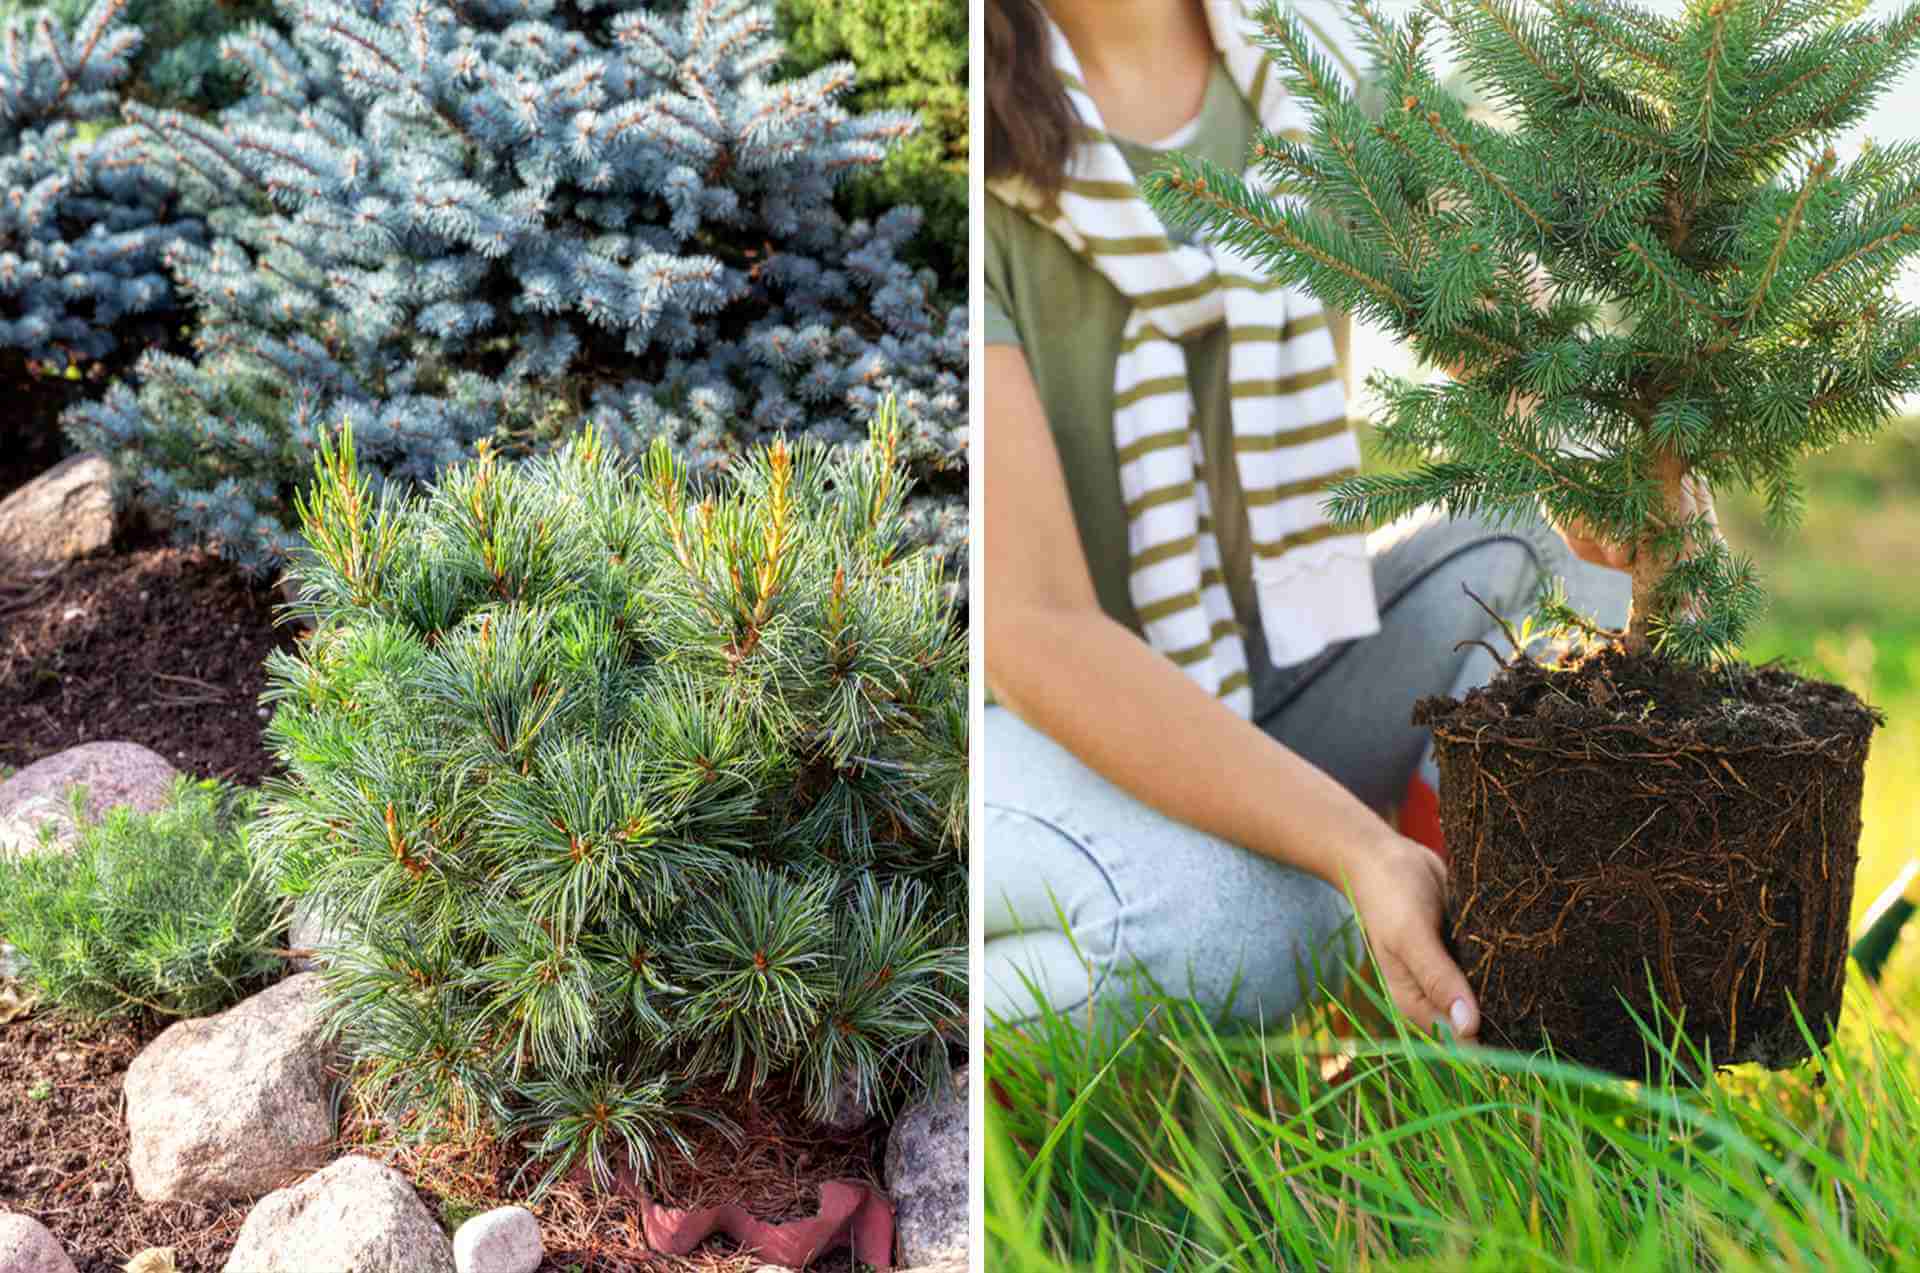 Dwarf Conifers In The Rockery And Woman Planting A Fir